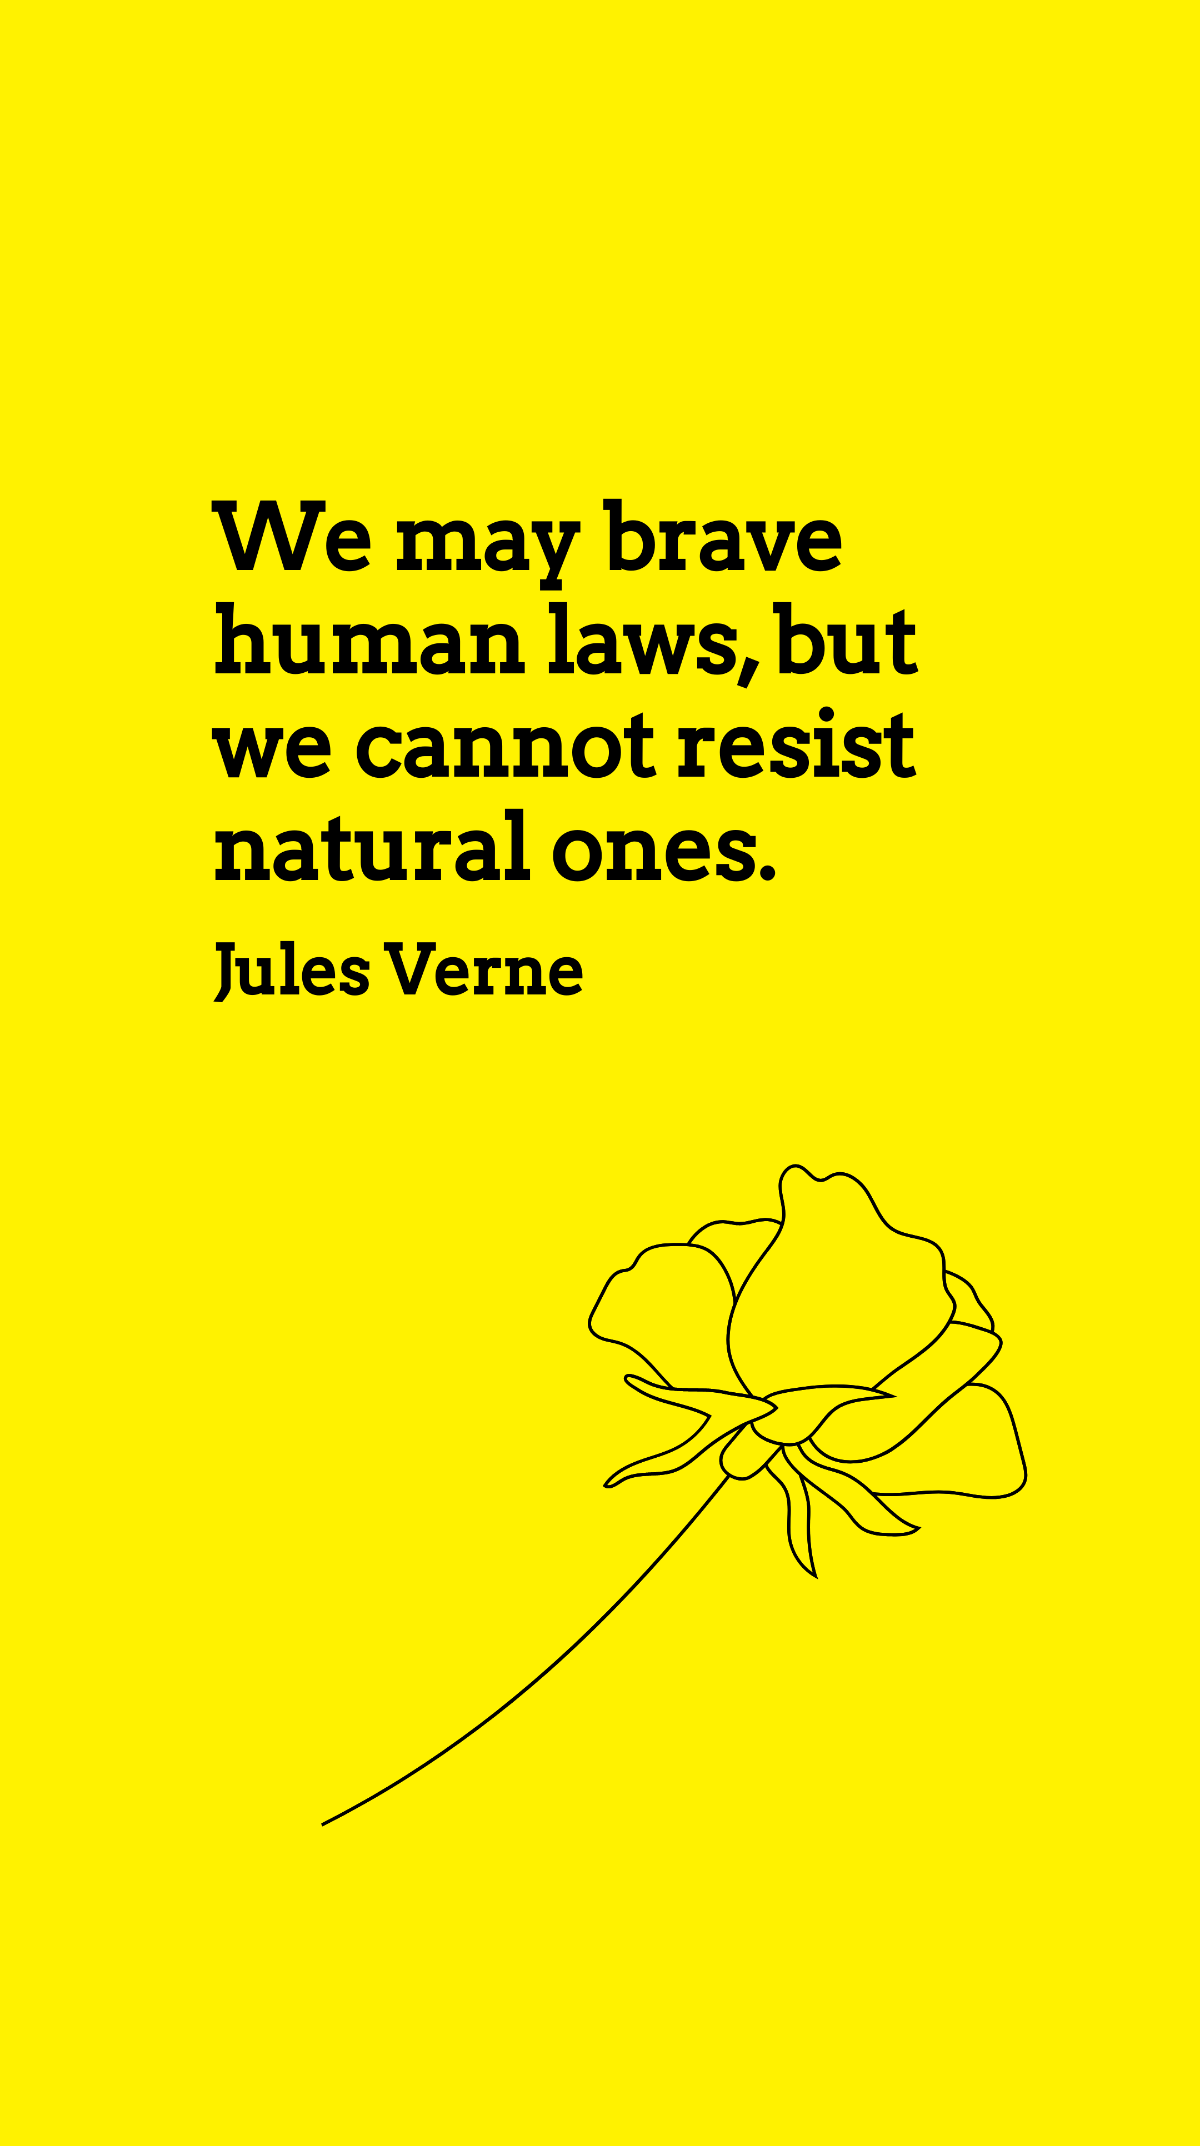 Jules Verne - We may brave human laws, but we cannot resist natural ones. Template